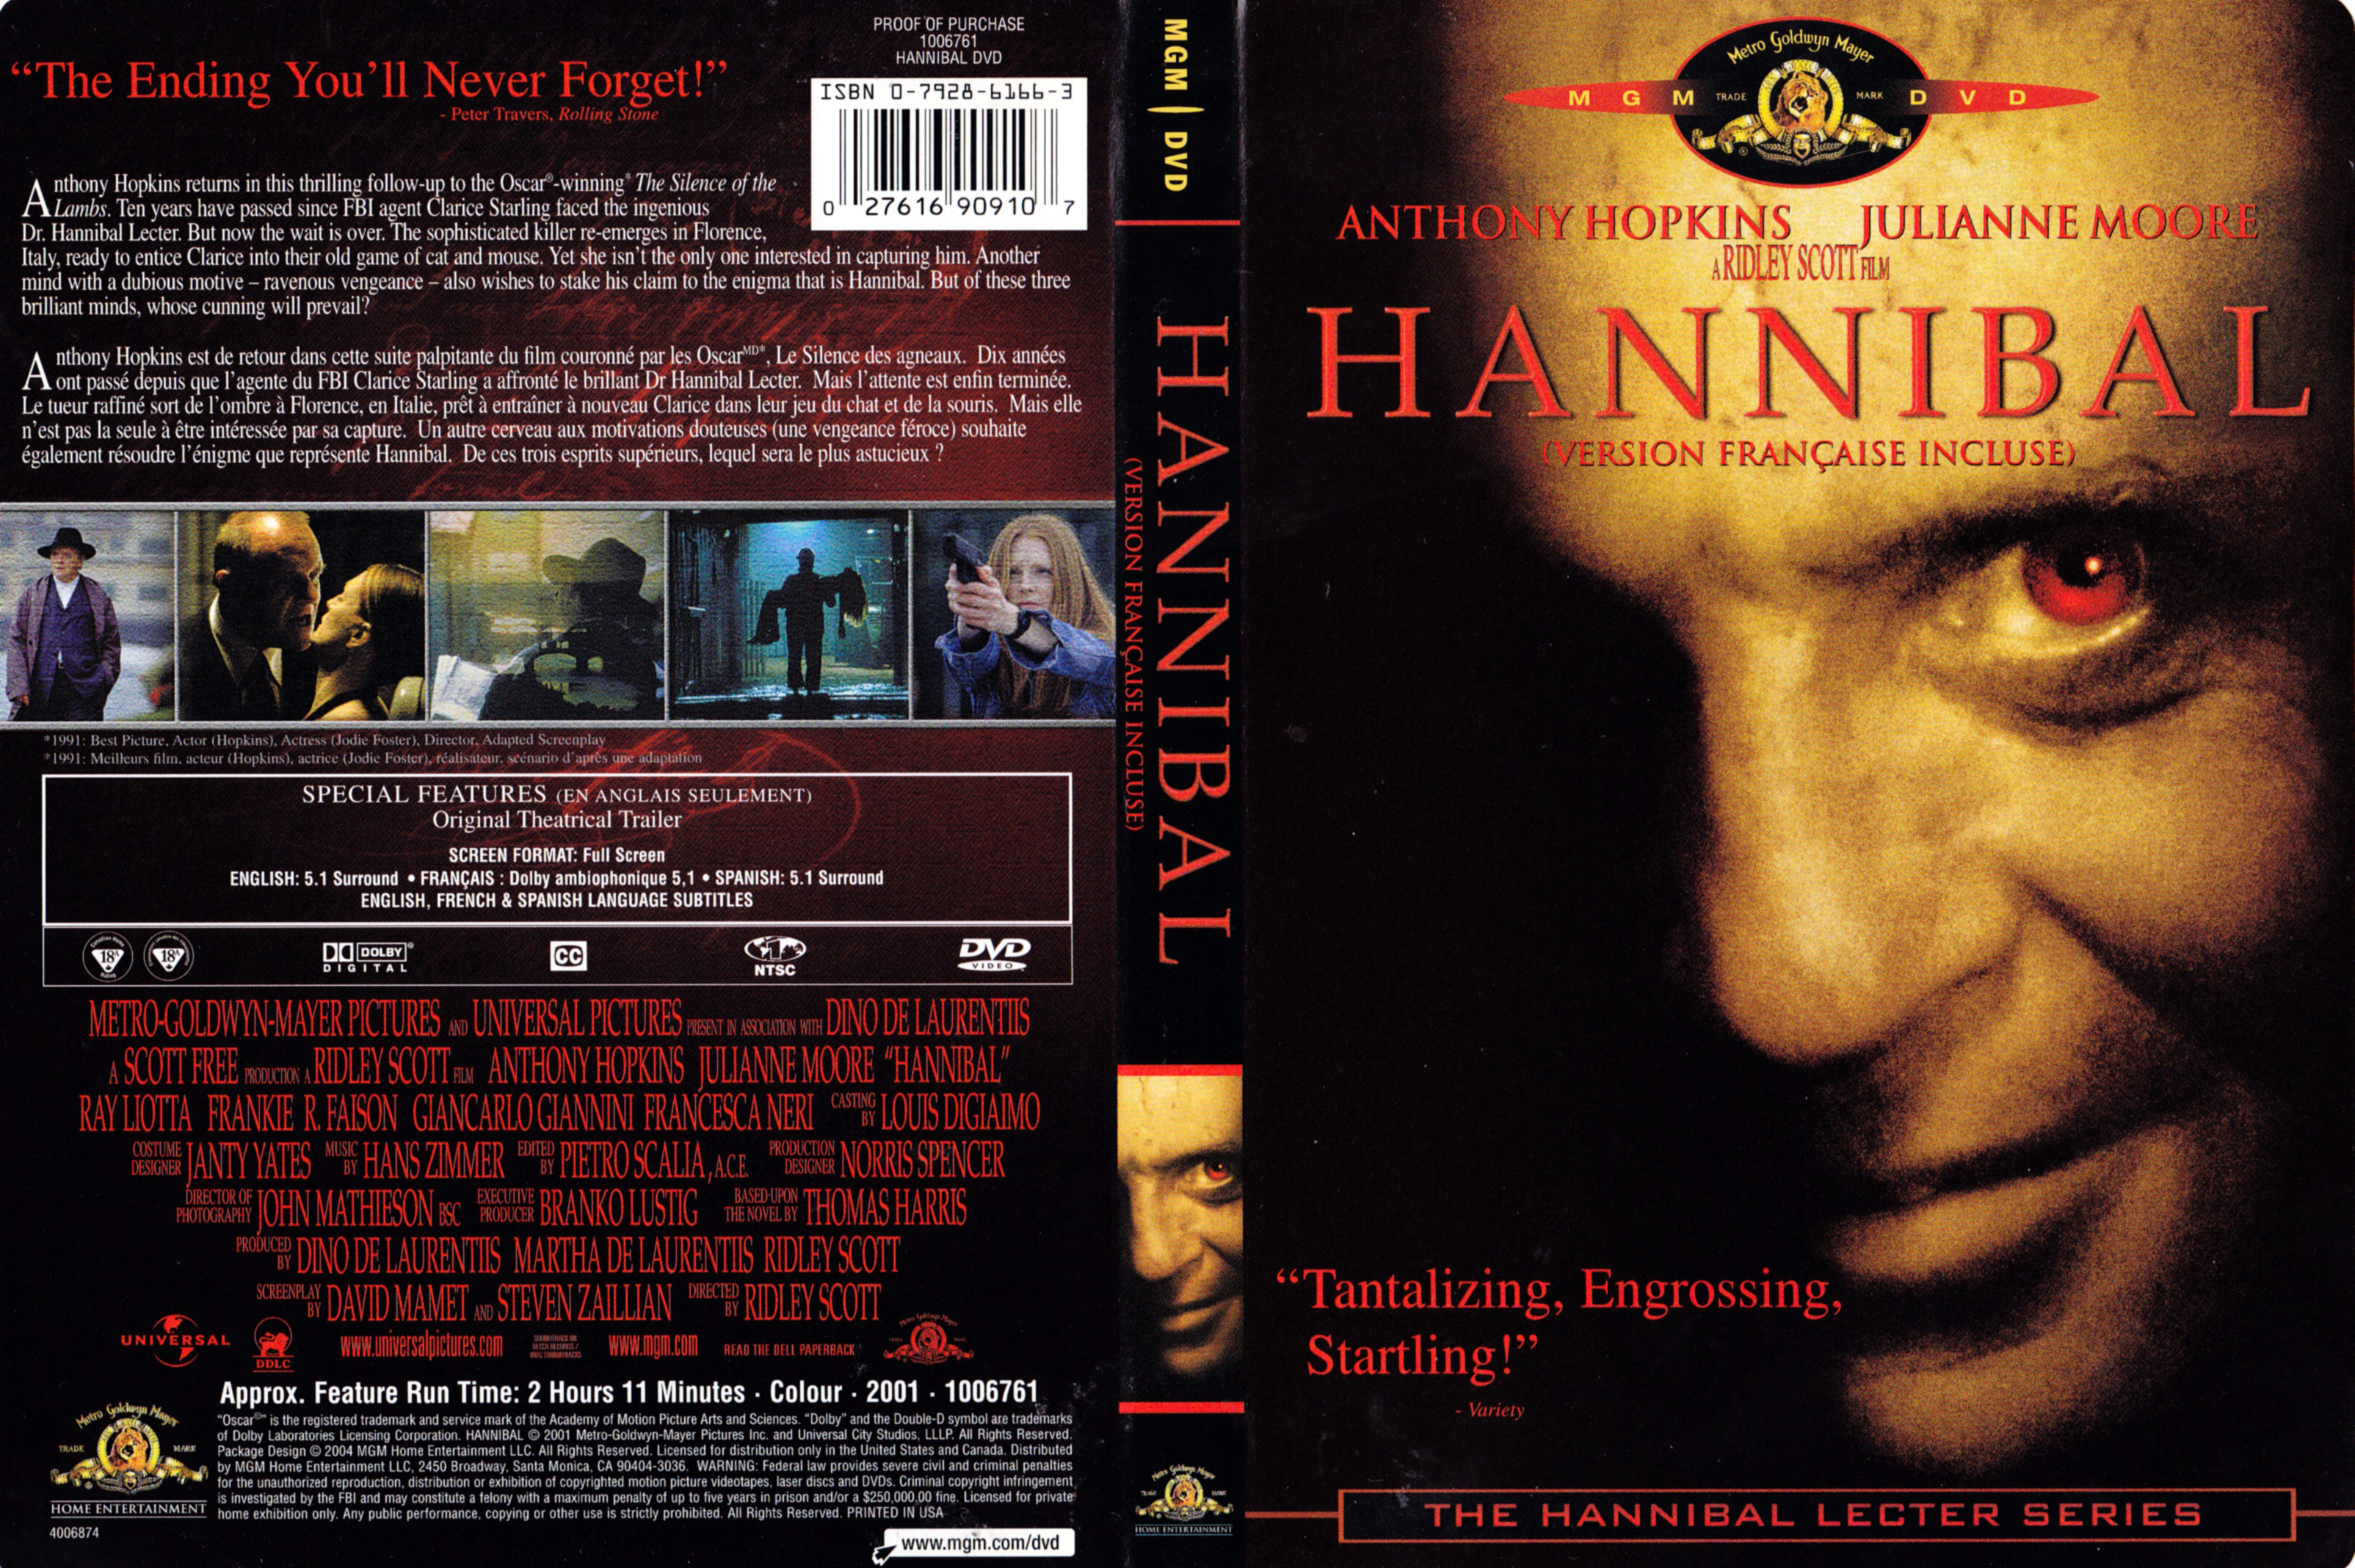 Jaquette DVD Hannibal (Canadienne)